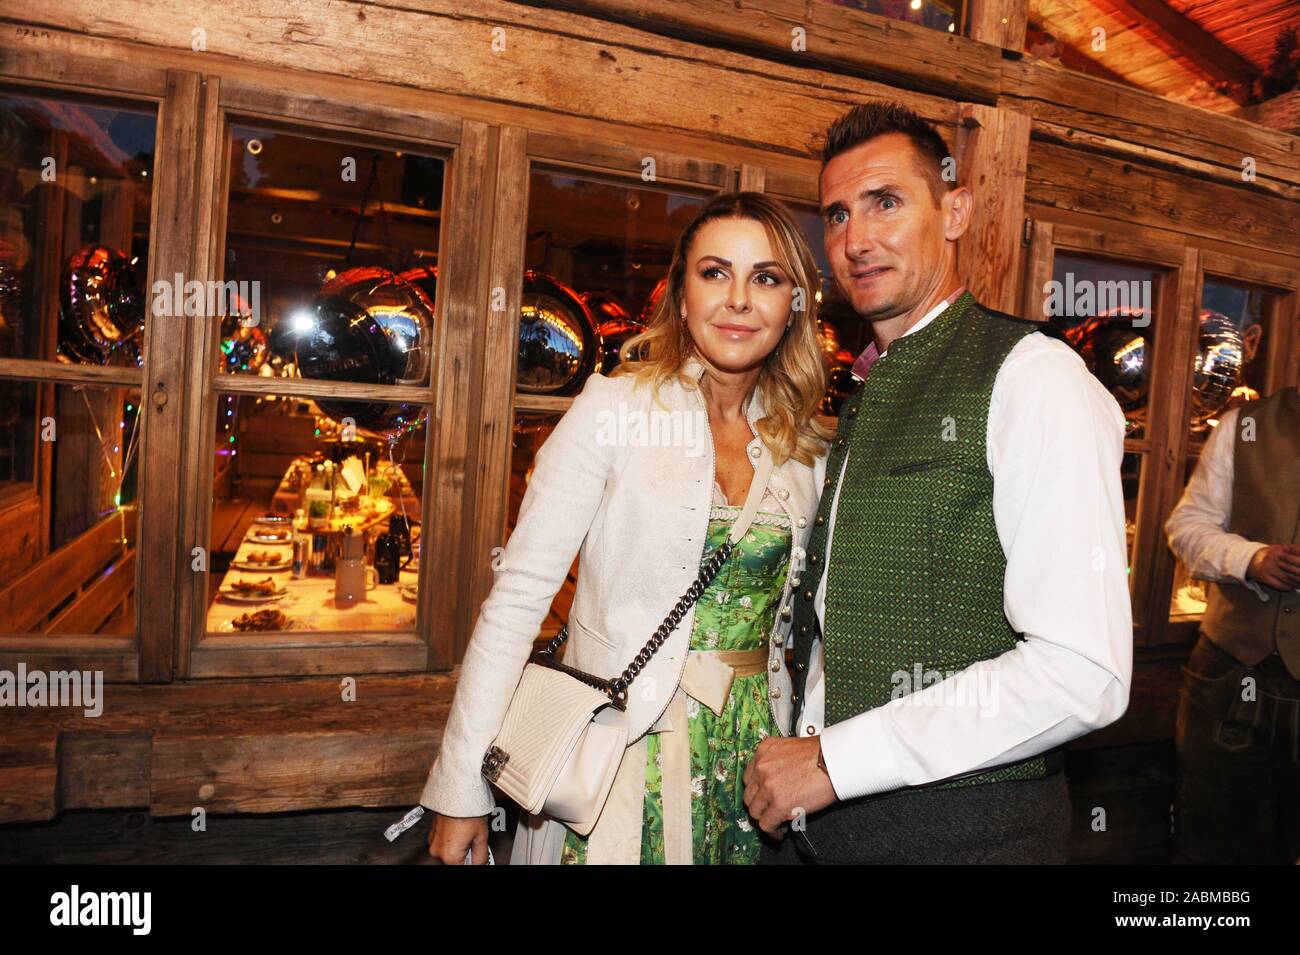 Miroslav Klose with wife Sylwia at the traditional Wiesn-Almauftrieb in the Käfer marquee. [automated translation] Stock Photo